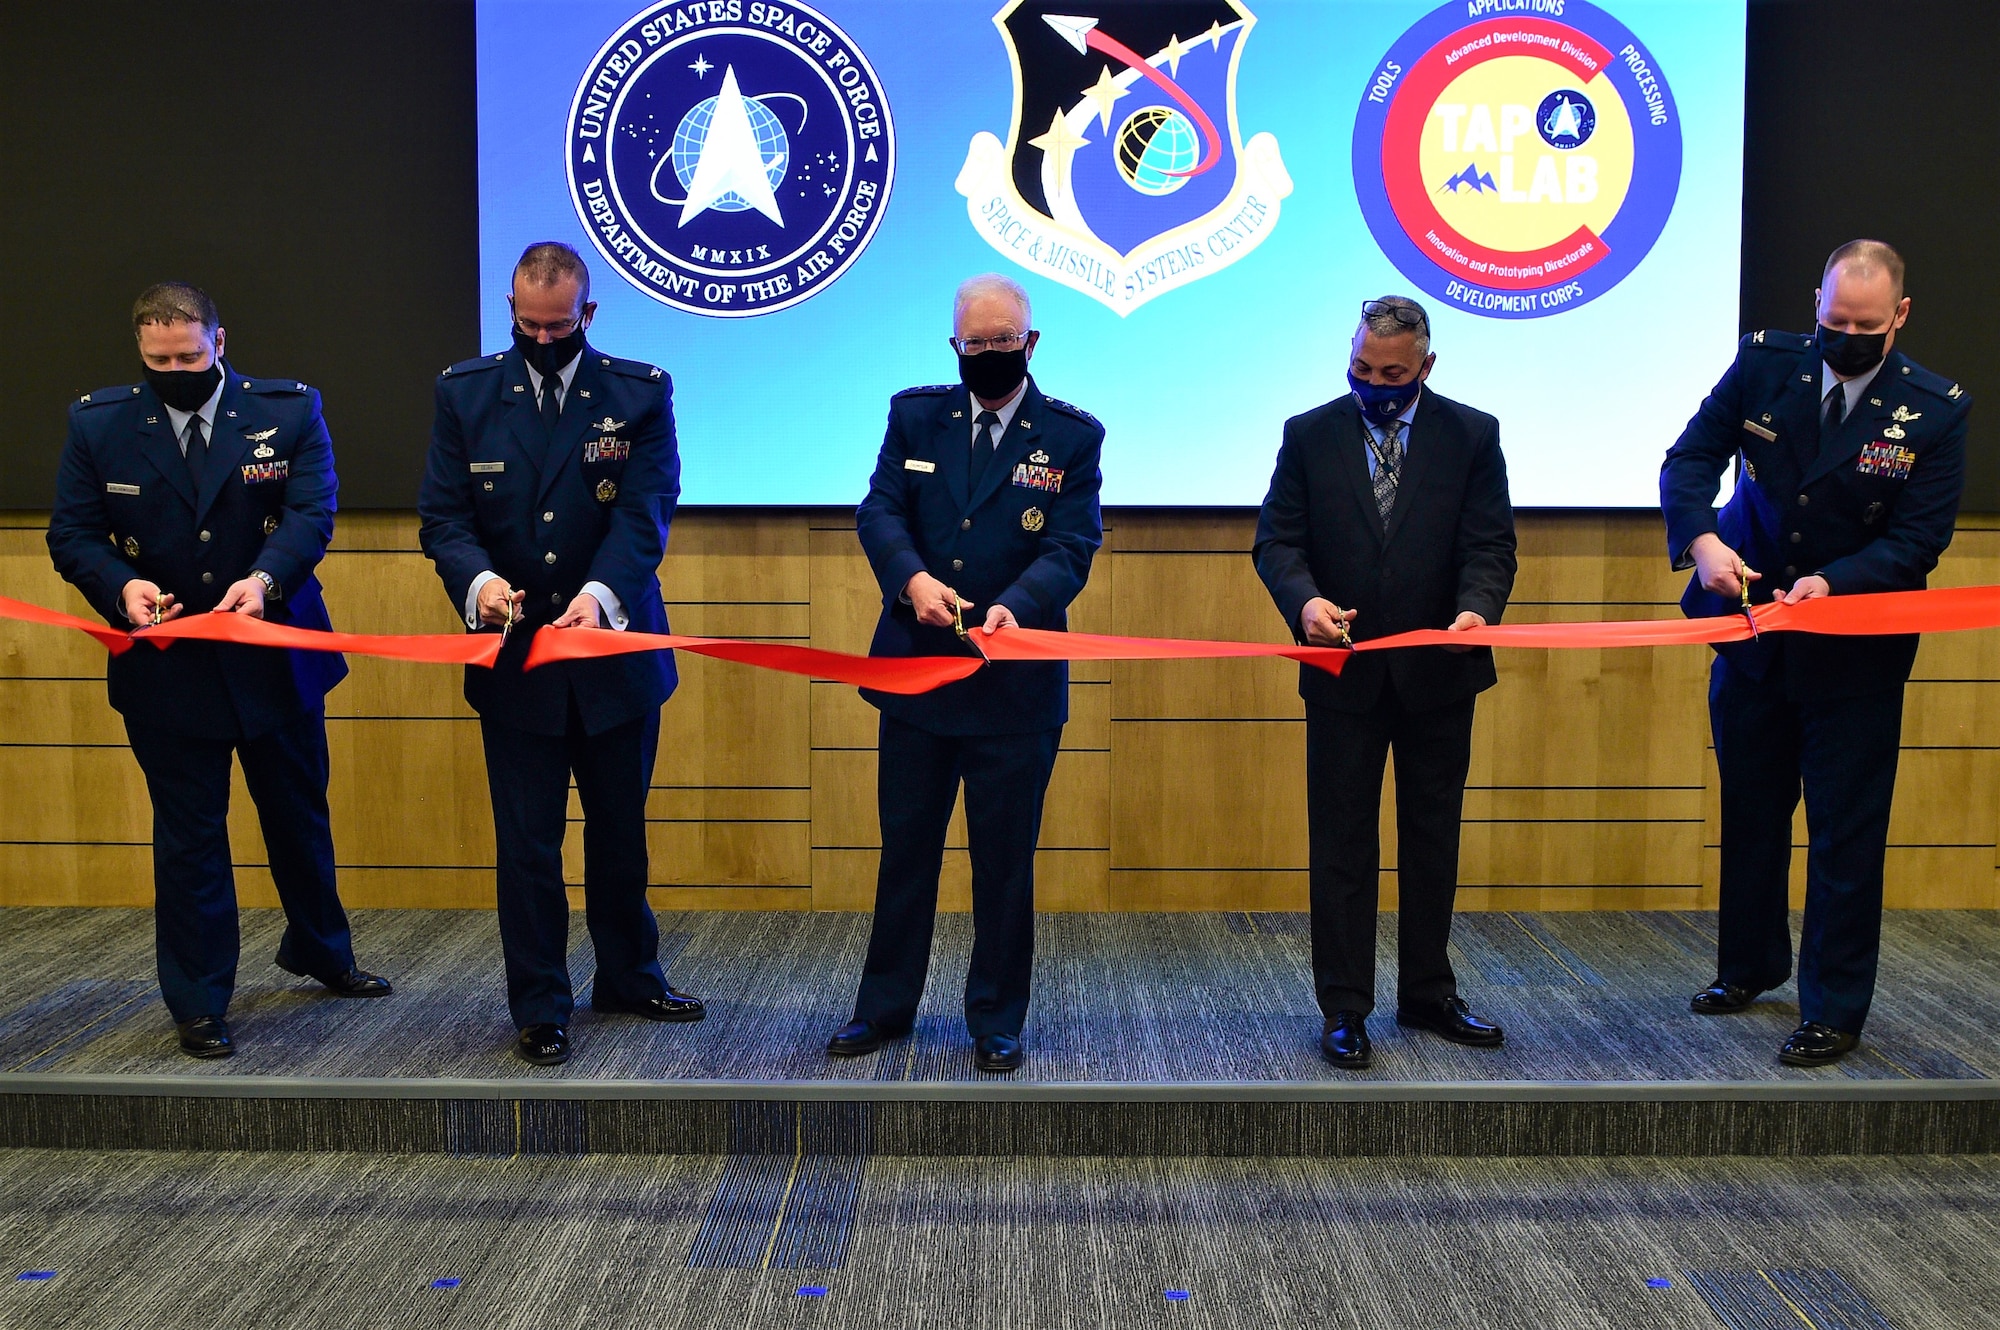 SMC hosted a grand re-opening ribbon-cutting ceremony to unveil the new renovated state-of-the-art TAP Lab on Mar. 31, 2021 in Boulder, Colo. Pictured in the ribbon-cutting are (l-r) Col Dennis Birchenough, Senior Material Leader, Advanced Development Division, Col. Timothy A. Sejba, program executive officer, Space Development, Lt. Gen. John F. Thompson, SMC commander and program executive officer for Space, Steven Polliard,  Director, TAP Lab and Col. Joseph J. Roth, Director, SMC’s Innovation and Prototyping Directorate.  (U.S. Space Force photo by Senior Airman Danielle McBride)